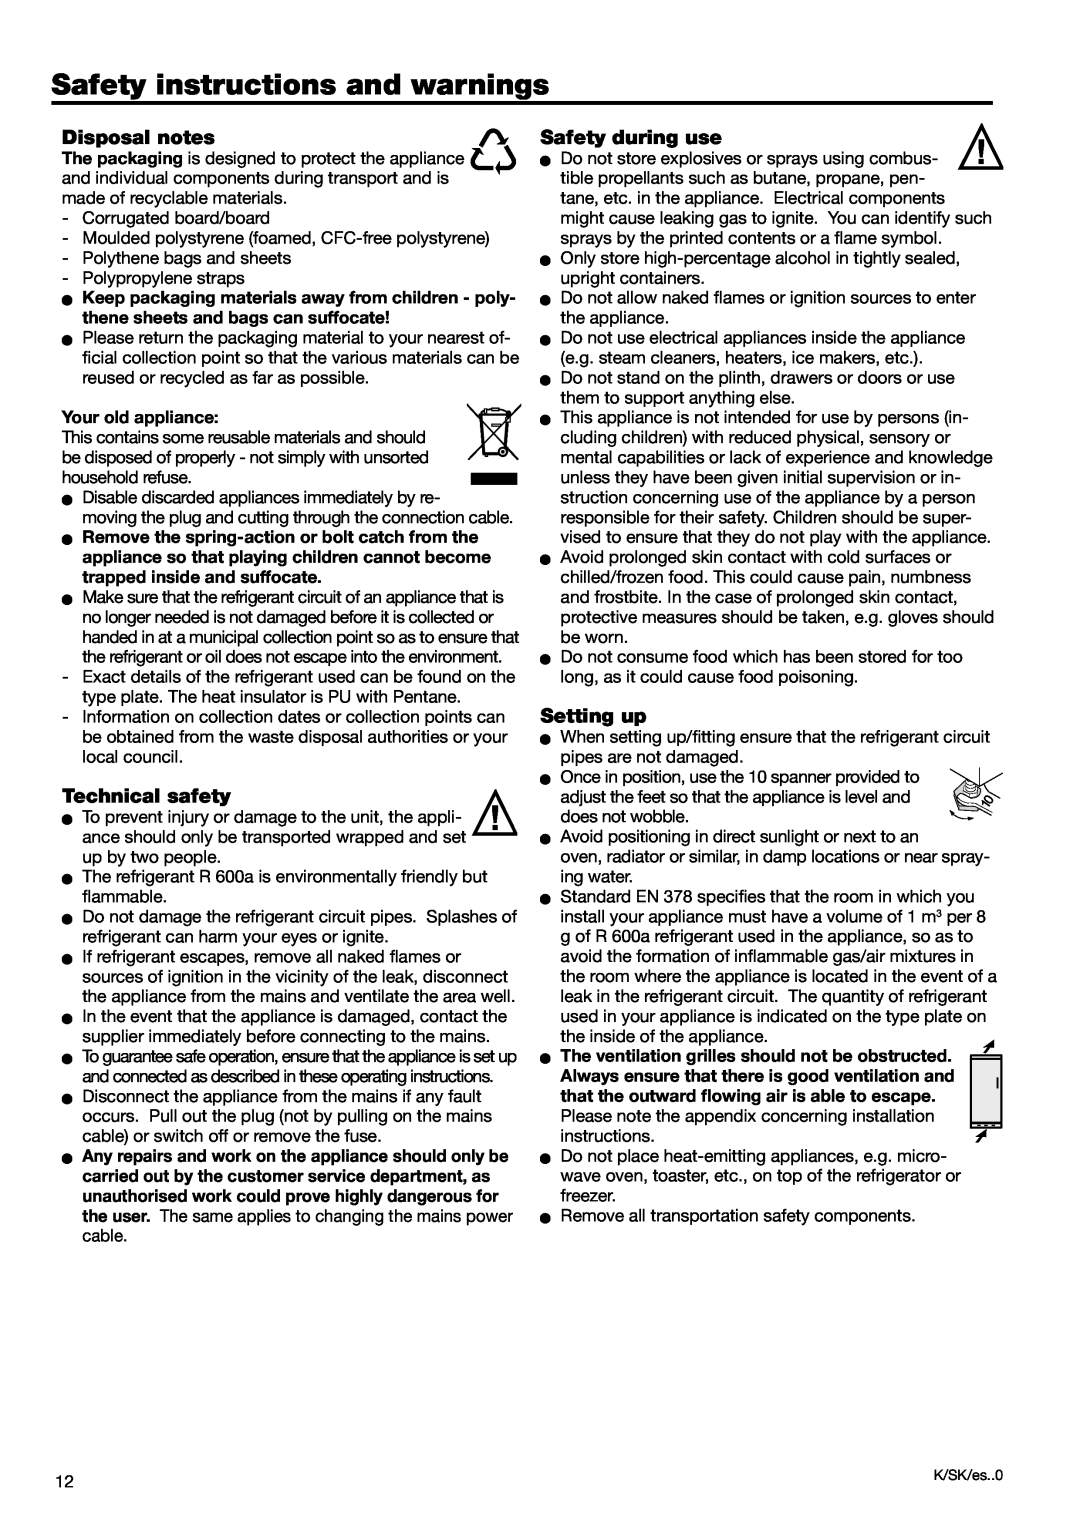 Liebherr 7082 218-03 Safety instructions and warnings, Disposal notes, Technical safety, Safety during use, Setting up 